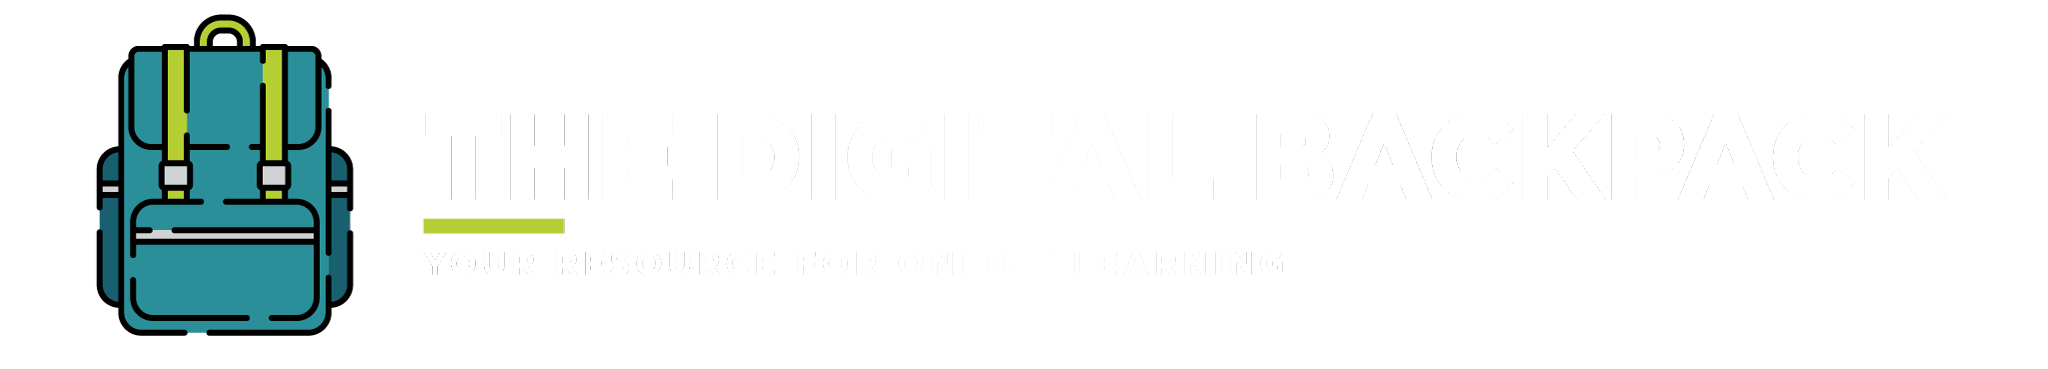 The Digital Backpack. Your Resource for Online Learning